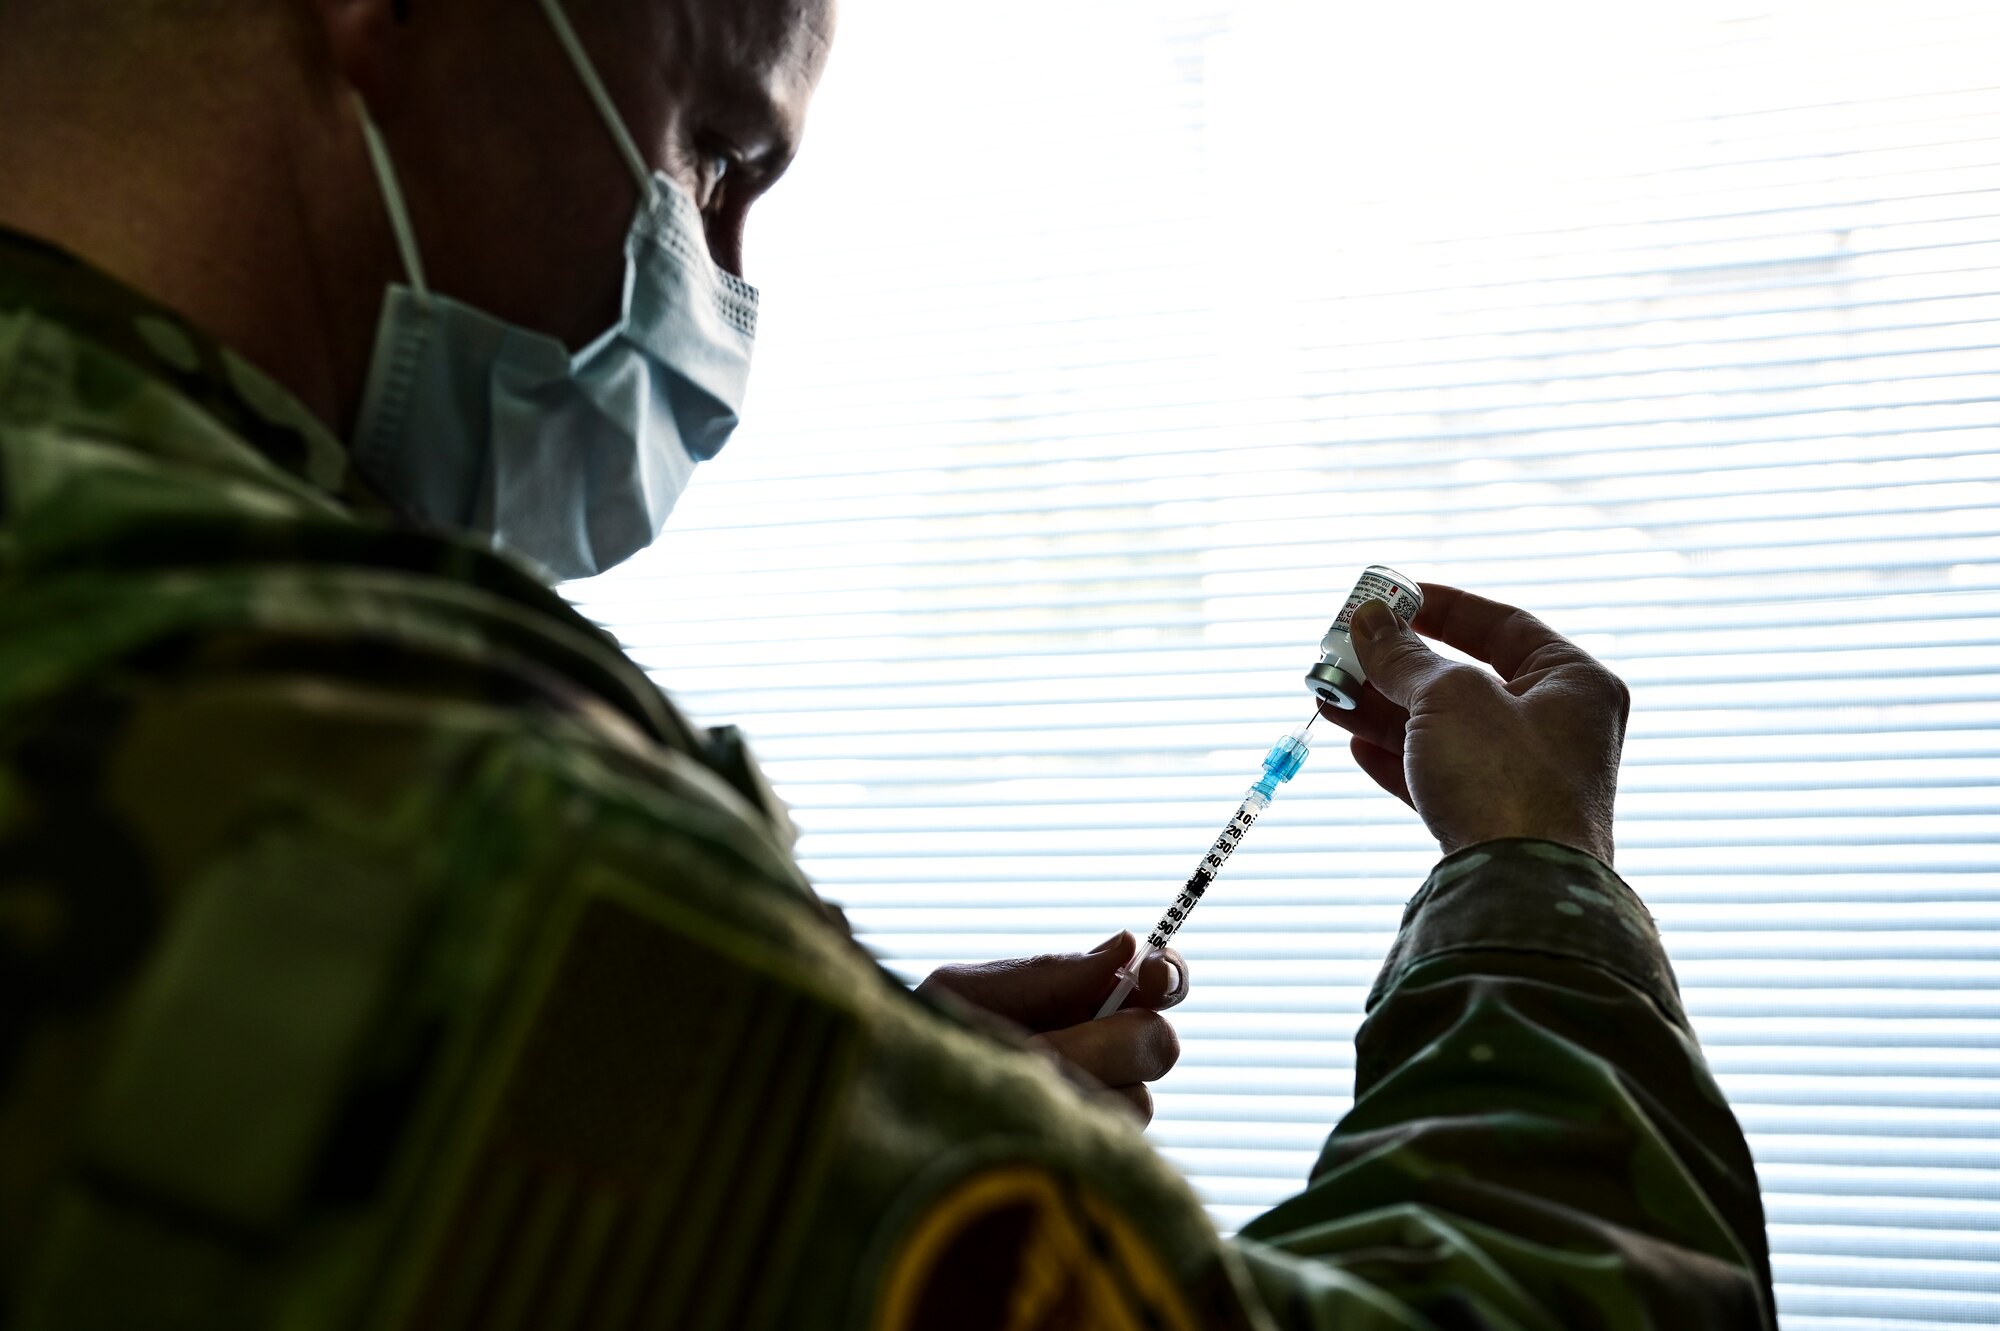 Tech. Sgt. Joseph Anthony, 911th Aeromedical Staging Squadron aeromedical technician, fills a syringe with the COVID-19 vaccine at the Pittsburgh International Airport Air Reserve Station, Pennsylvania, Feb. 4, 2021.